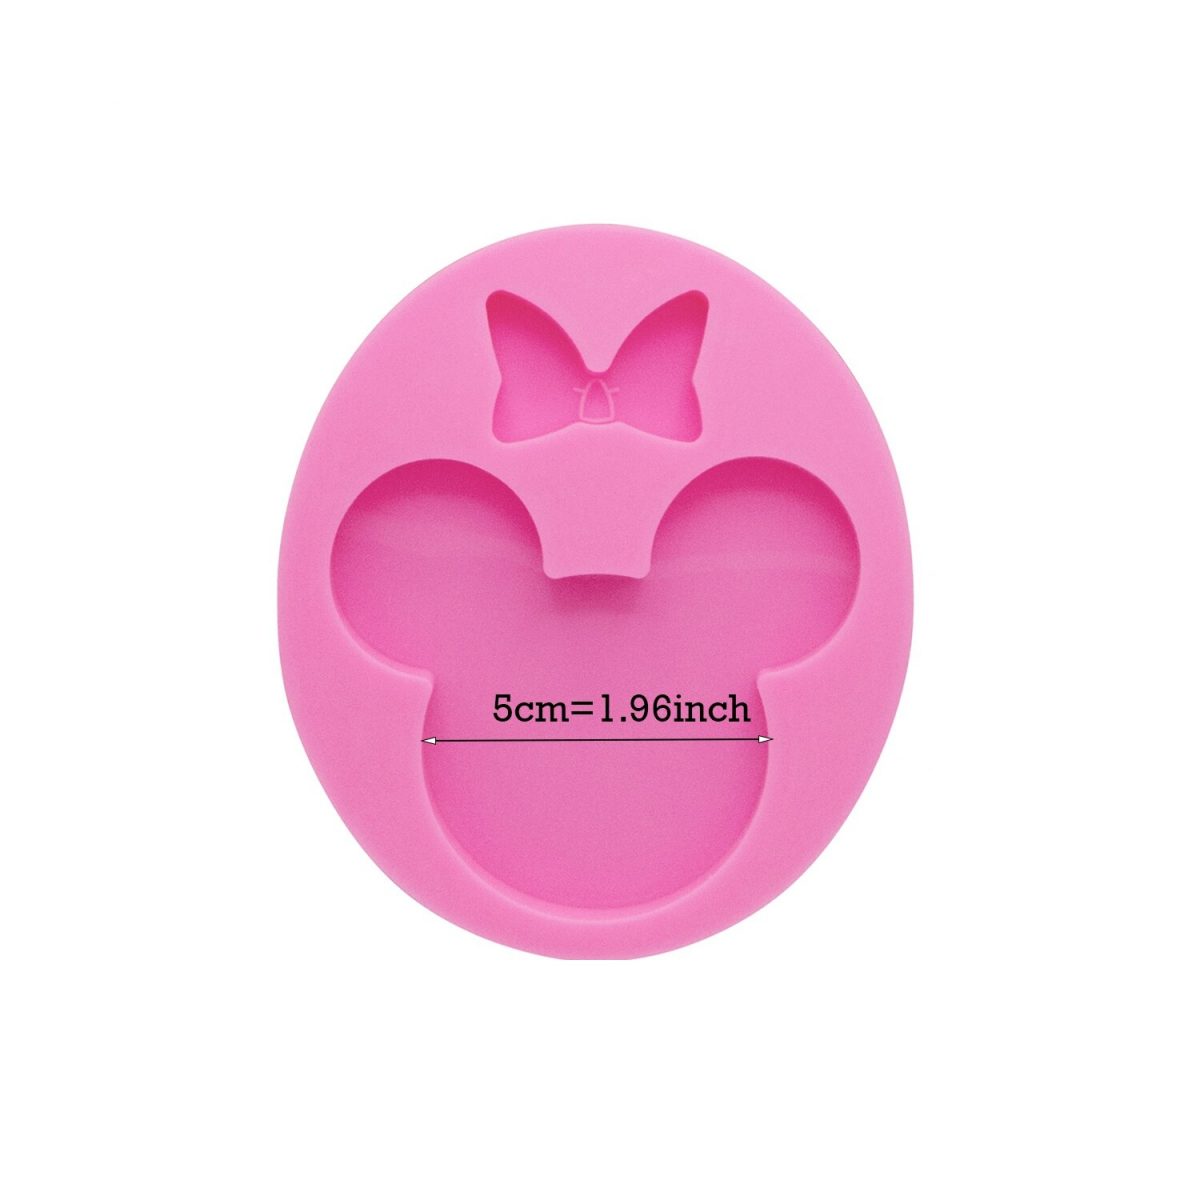 DY0075 Shiny 1.57/1.96 inches Mouse Bow silicone mold cake decorating tools resin gumpaste Fondant Sugar Craft Molds DIY Cake